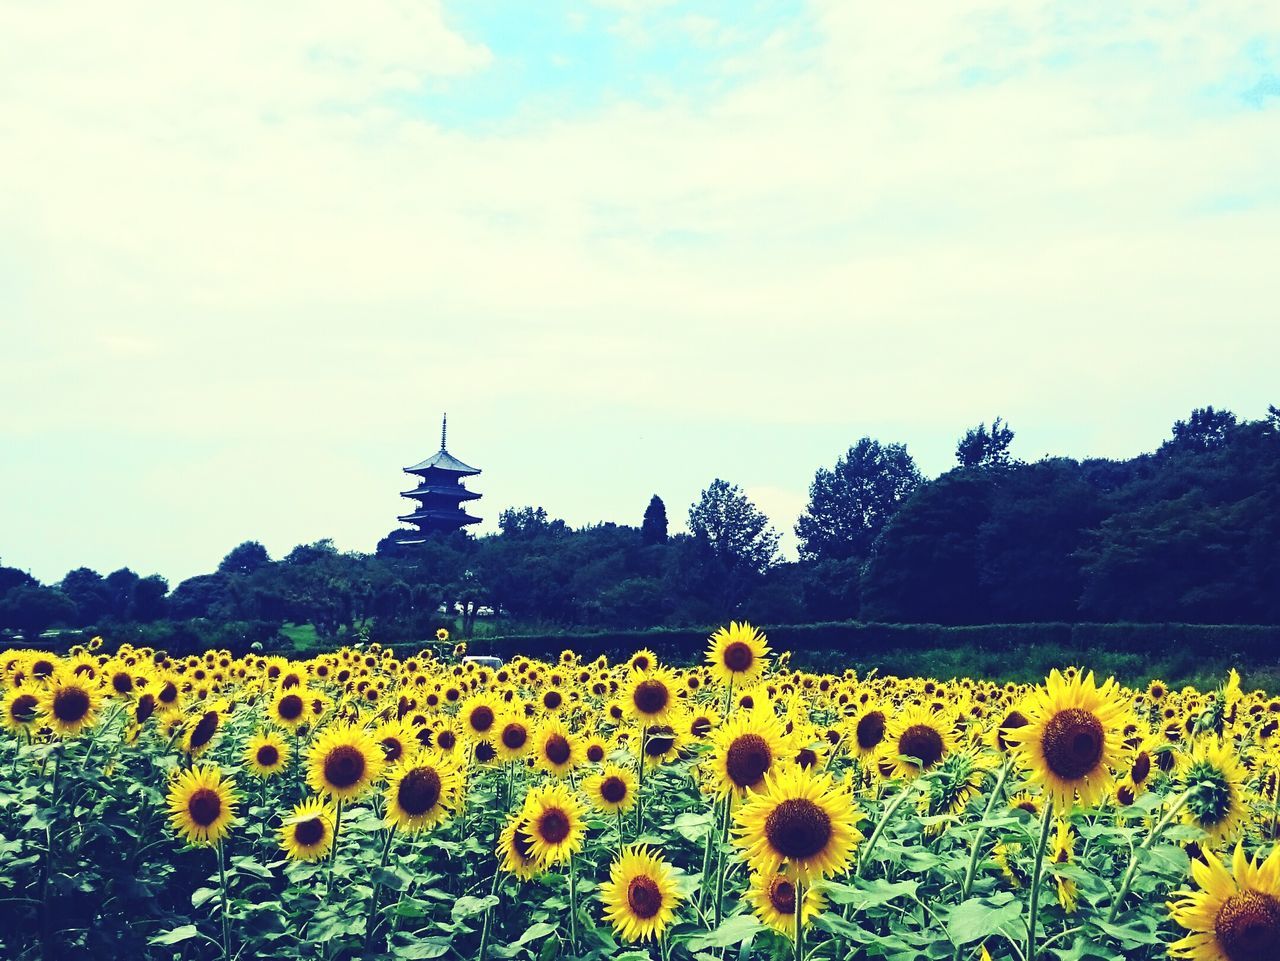 flower, yellow, freshness, beauty in nature, growth, fragility, field, sunflower, rural scene, sky, nature, landscape, blooming, tranquil scene, agriculture, plant, petal, flower head, tranquility, scenics, in bloom, abundance, blossom, cloud - sky, outdoors, no people, cloud, day, idyllic, botany, horizon over land